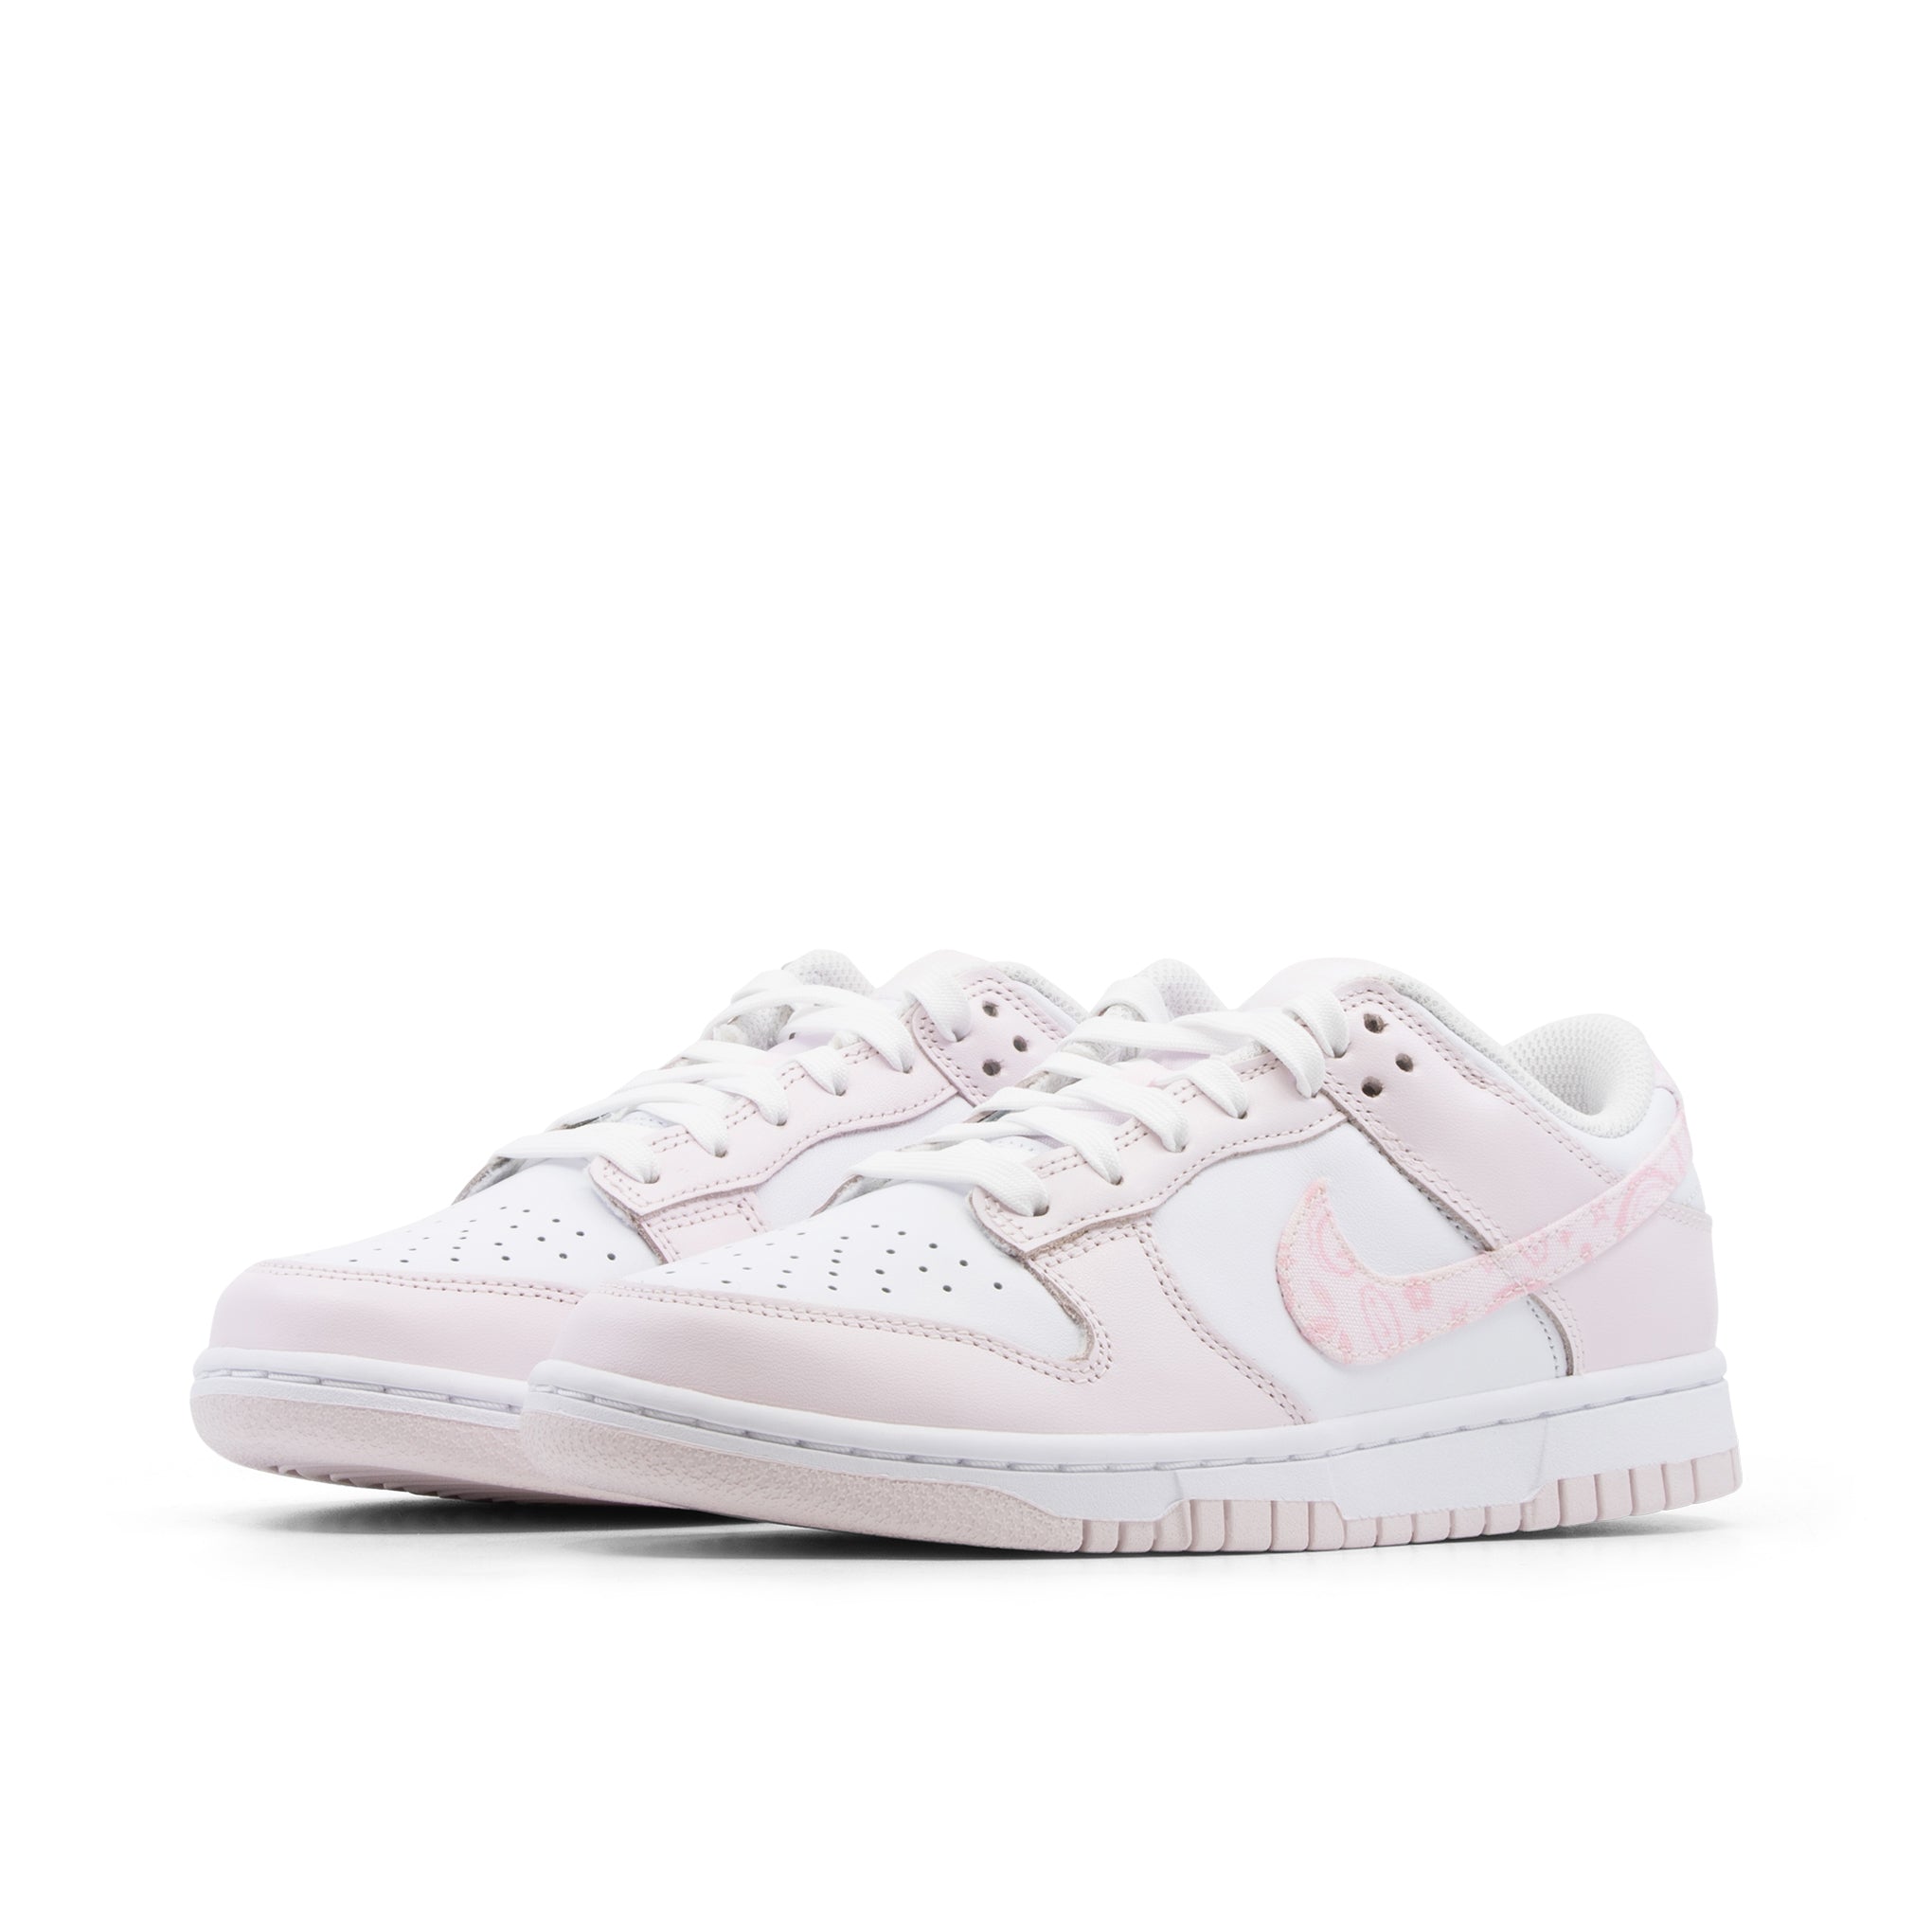 NIKE DUNK LOW WMNS PINK PAISLEY